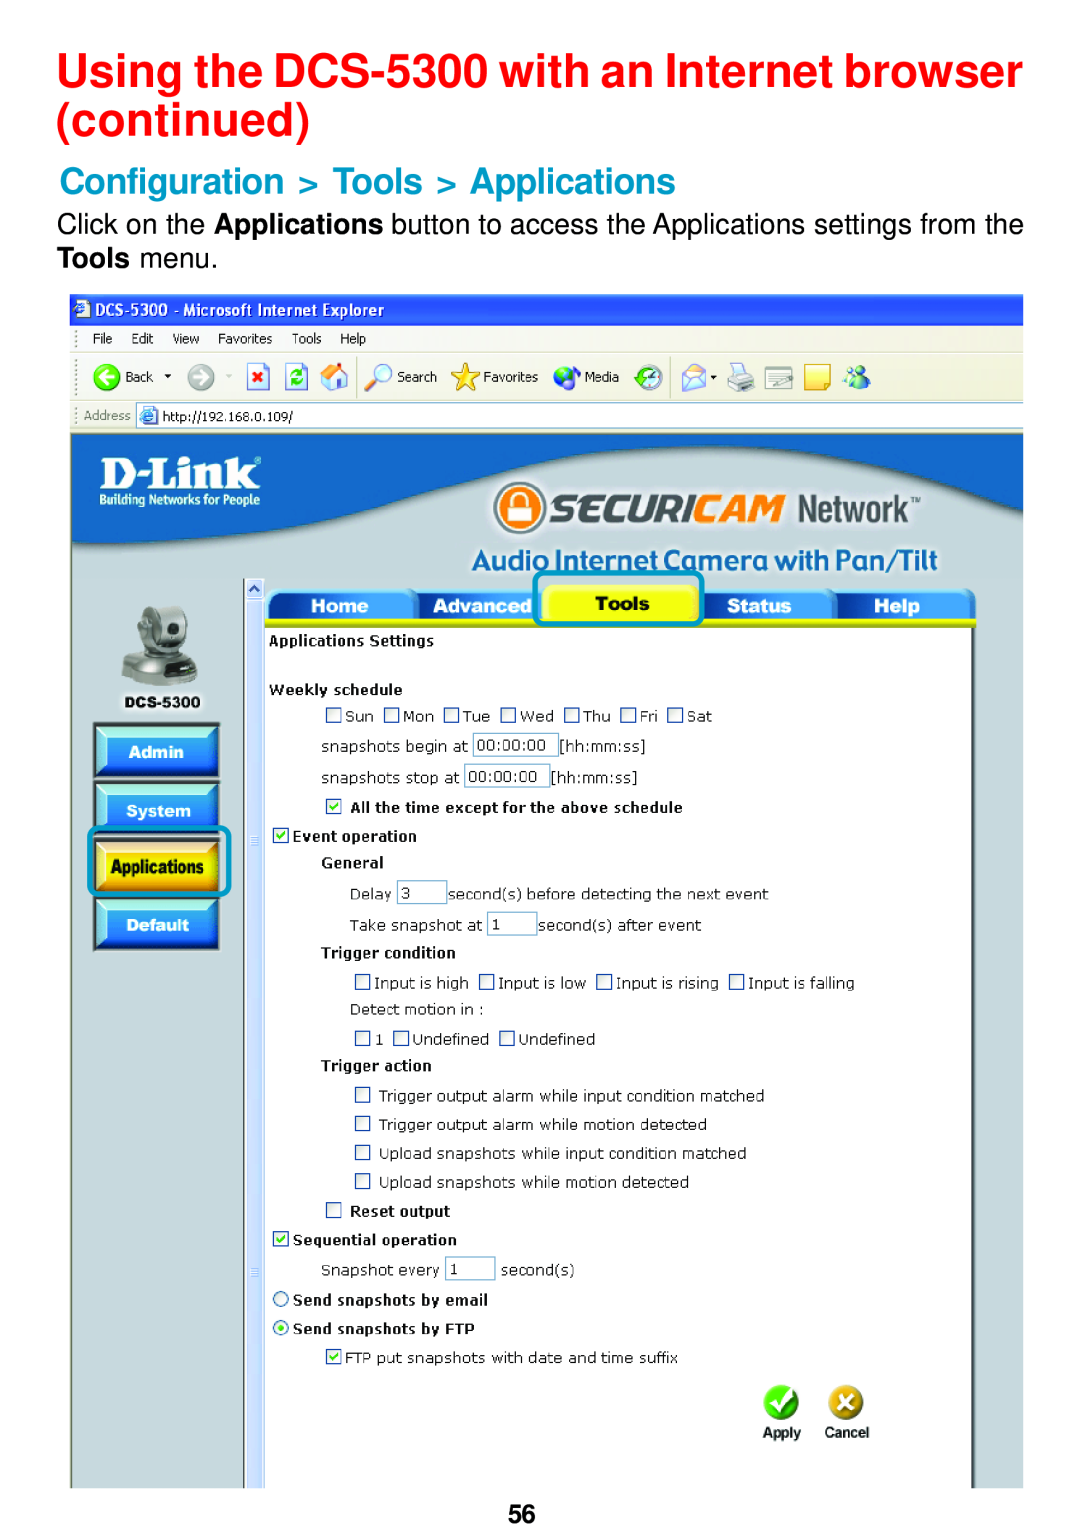 D-Link manual Configuration Tools Applications, Using the DCS-5300 with an Internet browser continued 